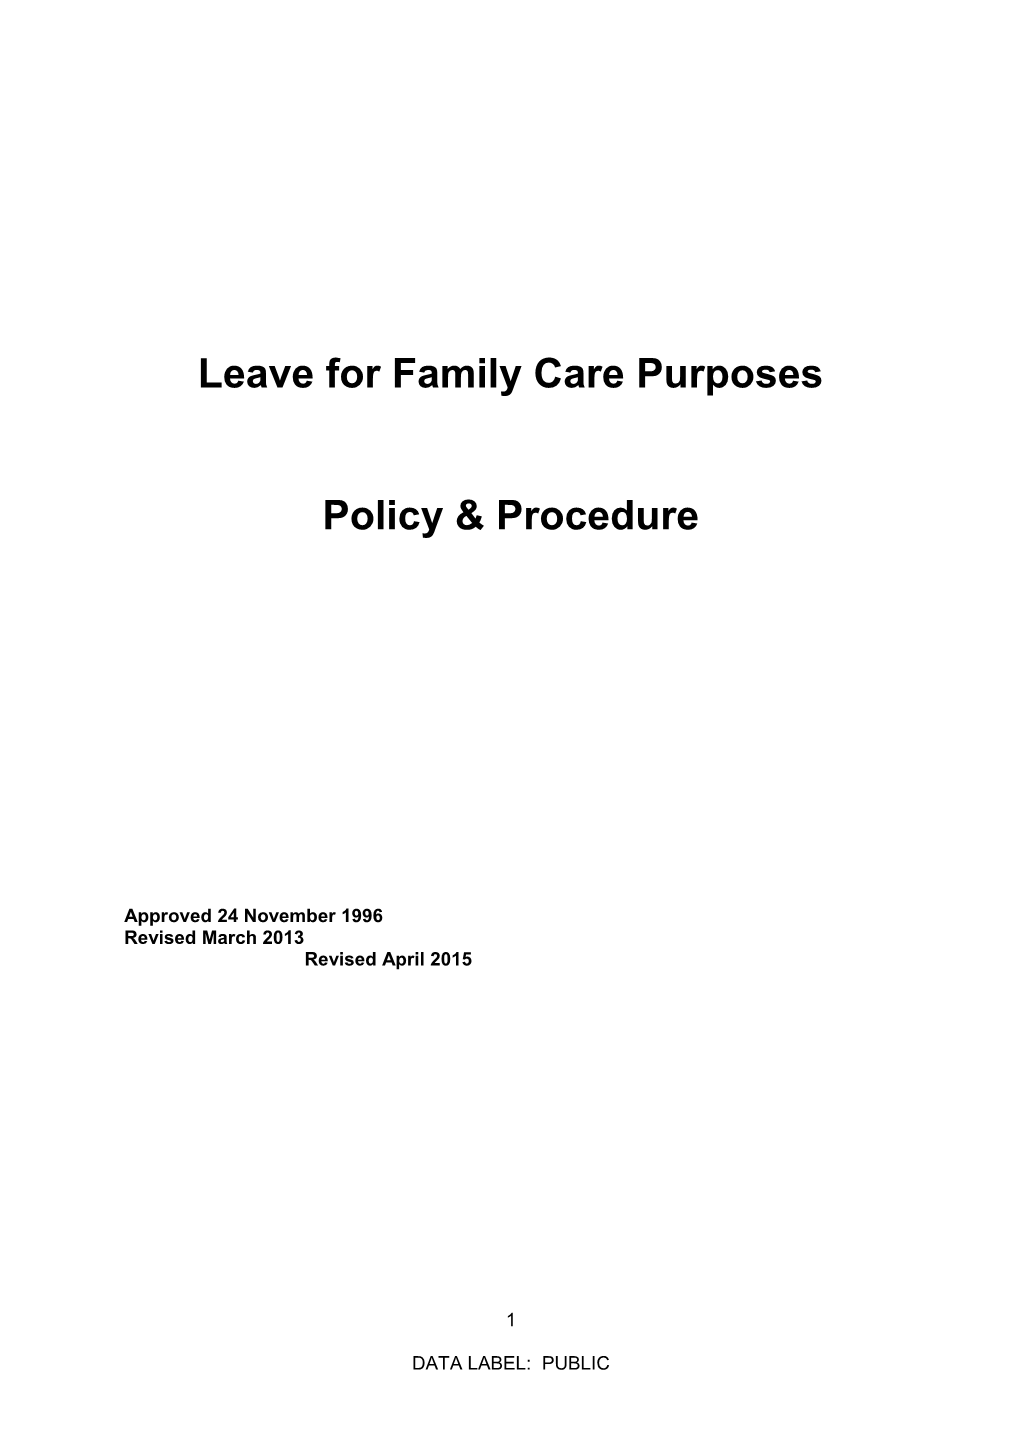 Leave for Family Care Purposes Policy & Procedure